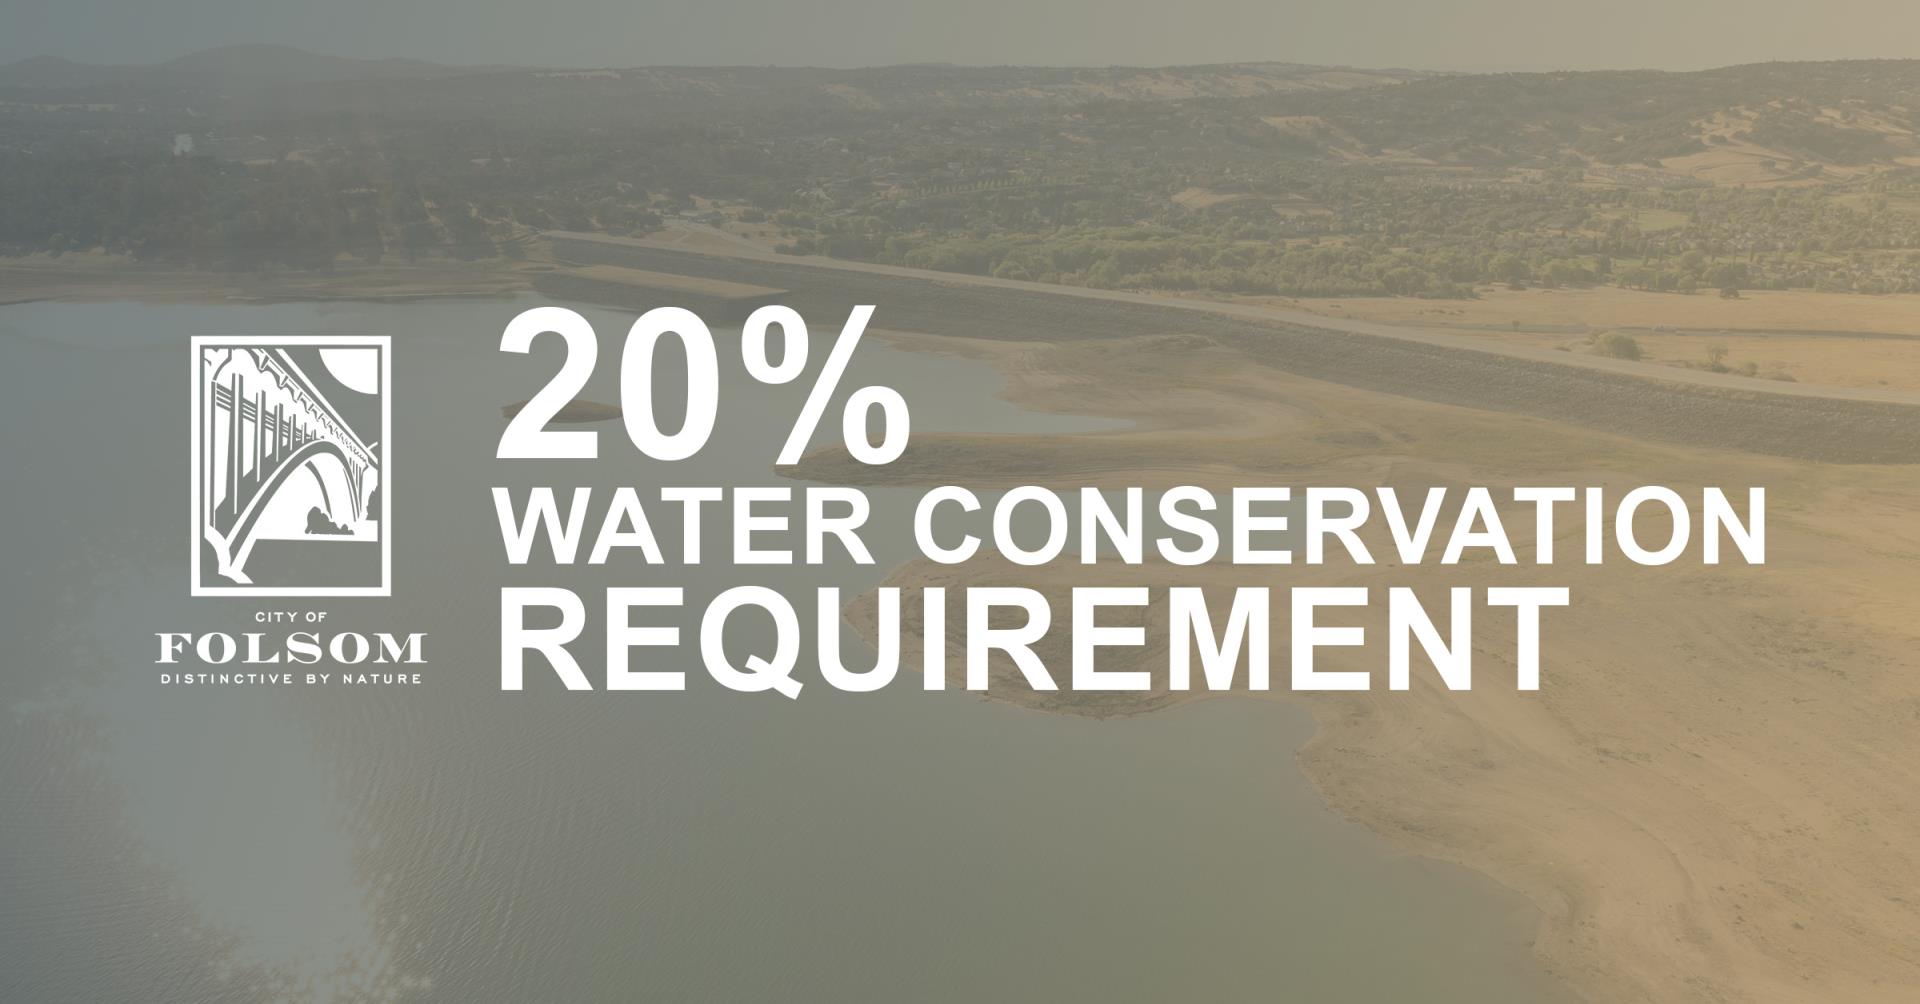 Emergency Graphics 2020 20 percent water conservation requirement and white city of folsom logo with a gray overlay on top of an aerial shot of the lake